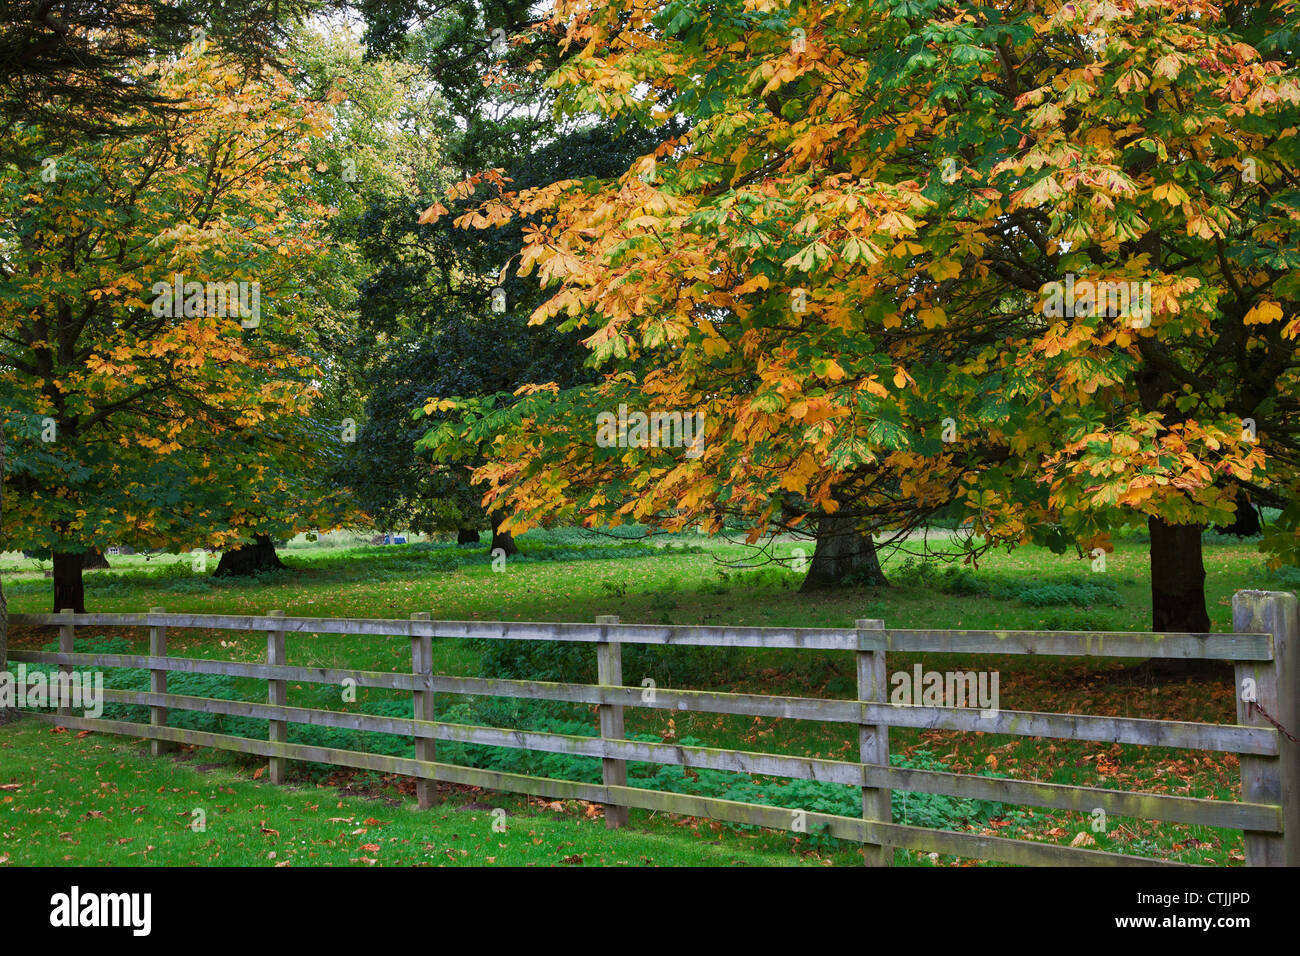 Wooden Rail Fence With Trees In Autumn Colours; Scottish Borders, Scotland Stock Photo